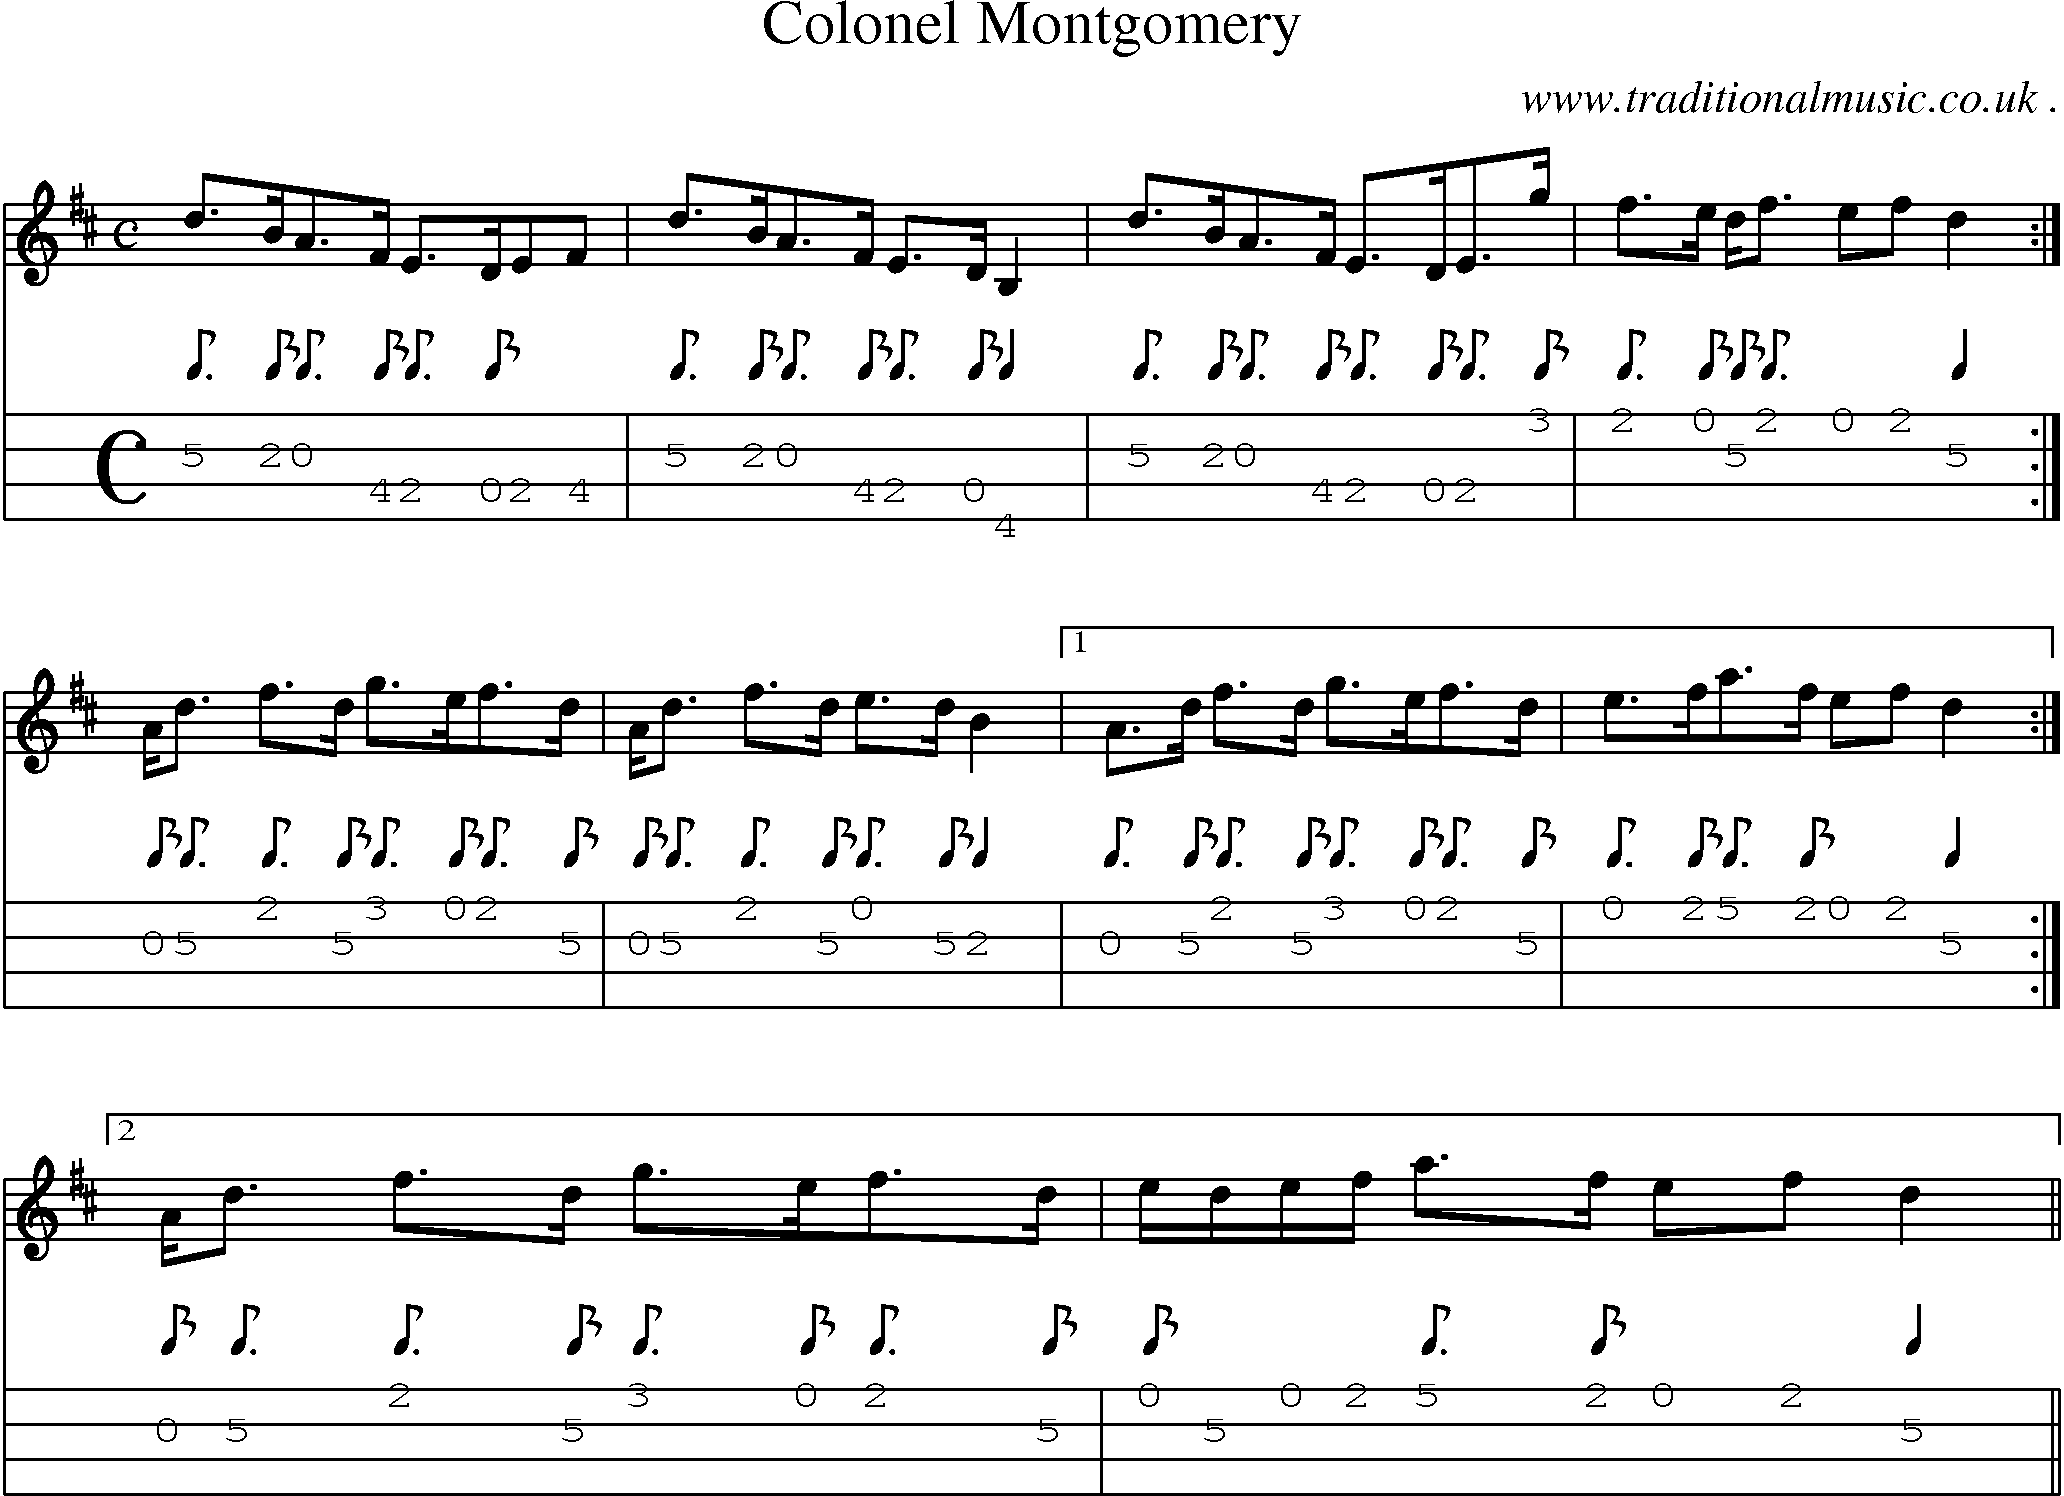 Sheet-music  score, Chords and Mandolin Tabs for Colonel Montgomery